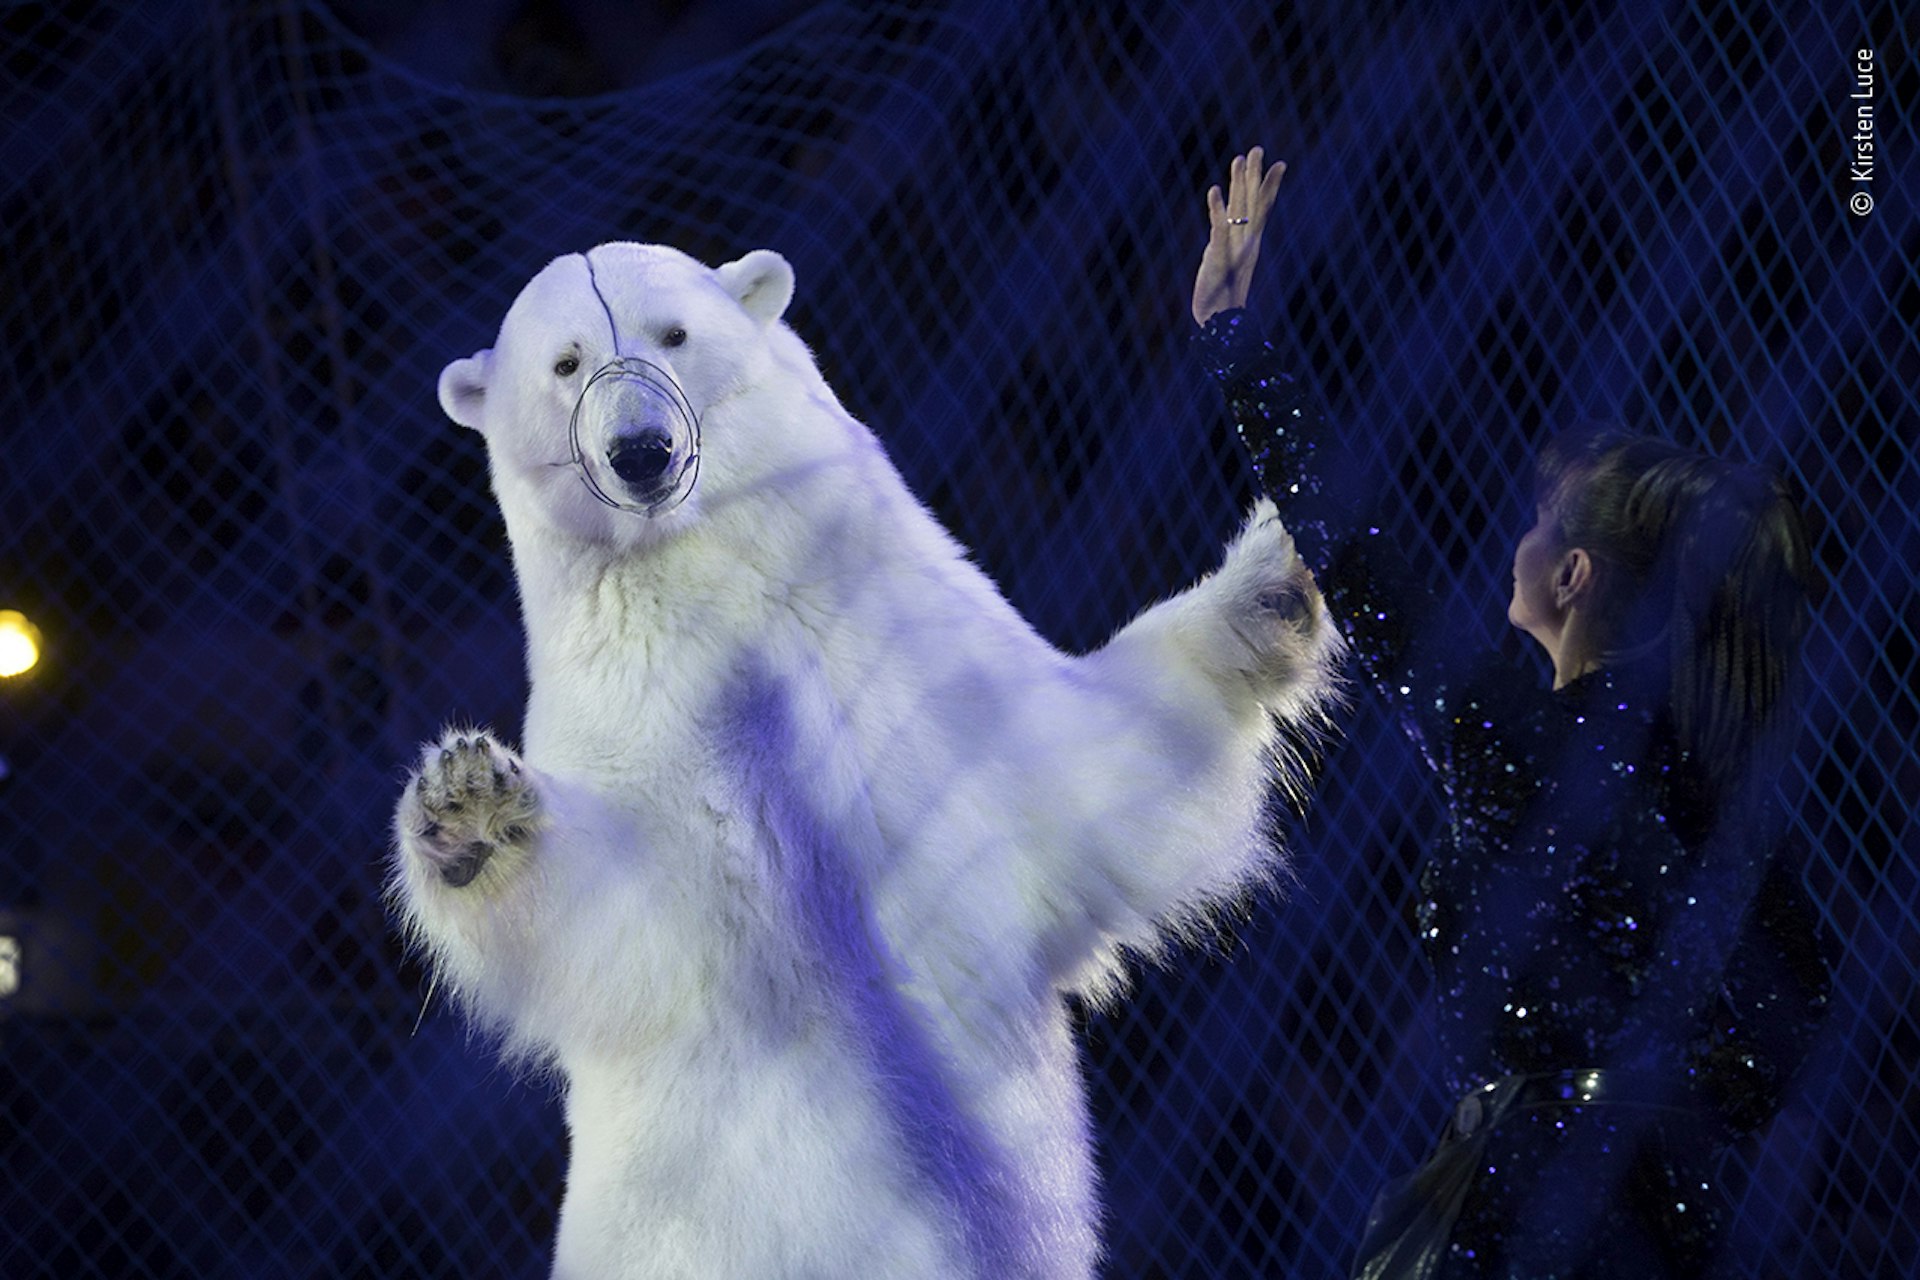 A polar bear wearing a wire muzzle performing with a female skater at an ice rink show